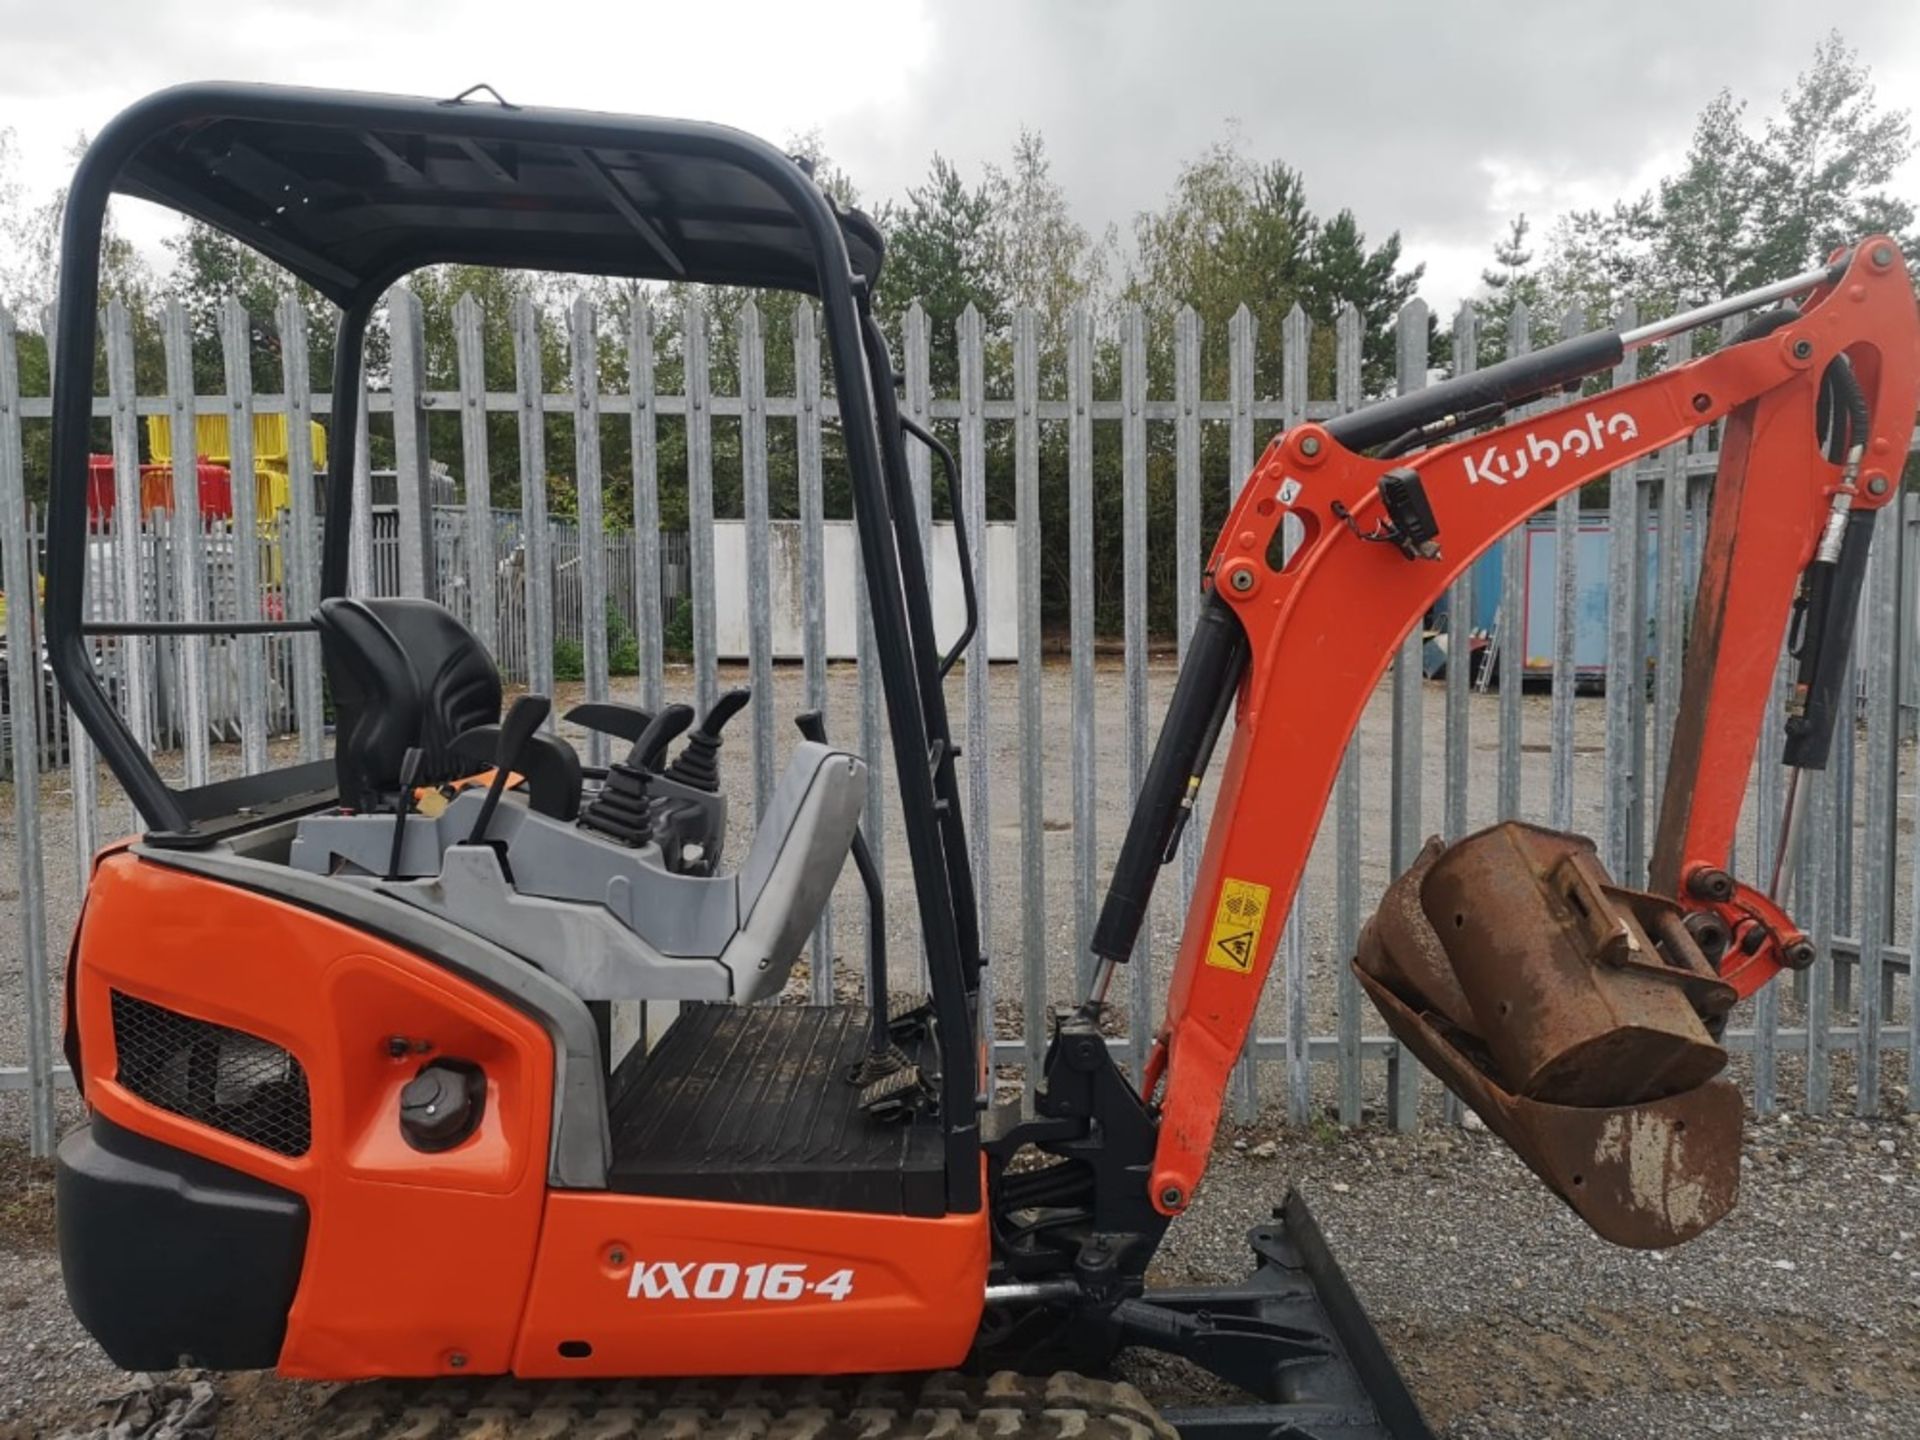 KUBOTA KX016.4 MINIDIGGER C.W 3 BUCKETS, 2015 2178HRS RDD 2 SPEED TRACKING PIPED FOR HAMMER,